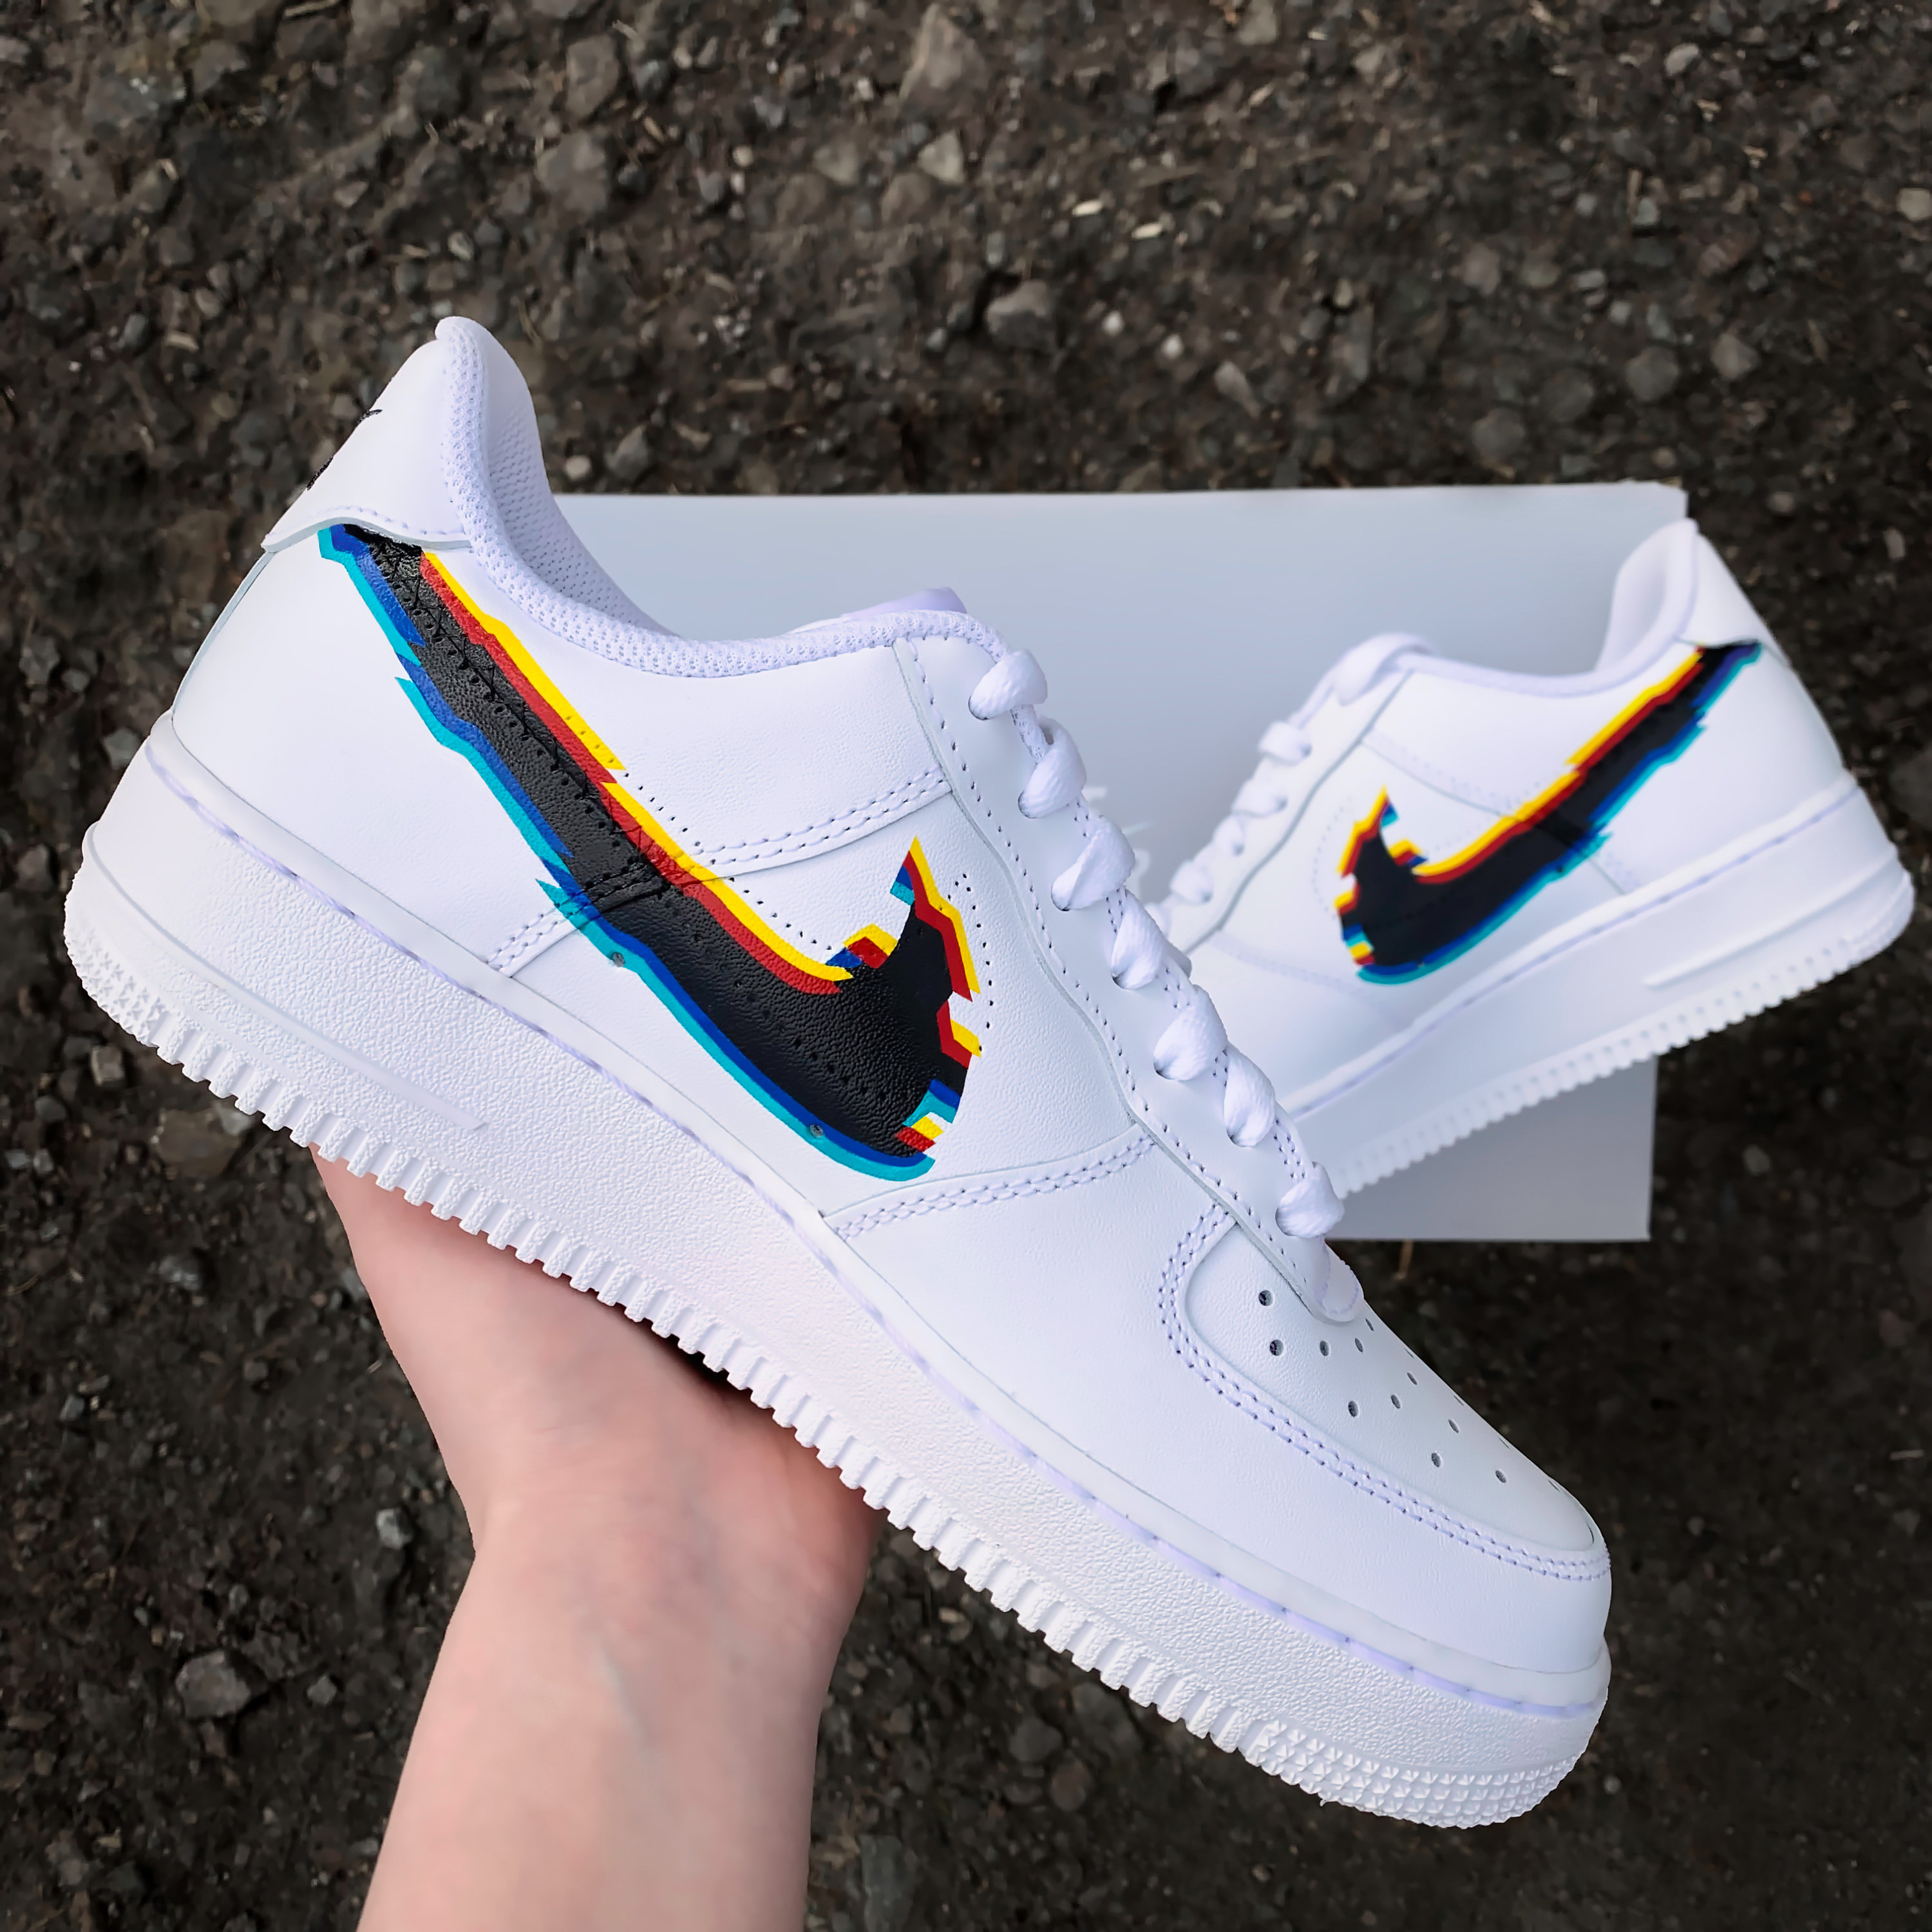 vrachtauto voering Bewusteloos Nike Air Force 1 Glitch Effect Custom Sneaker Glitch Effect - Etsy